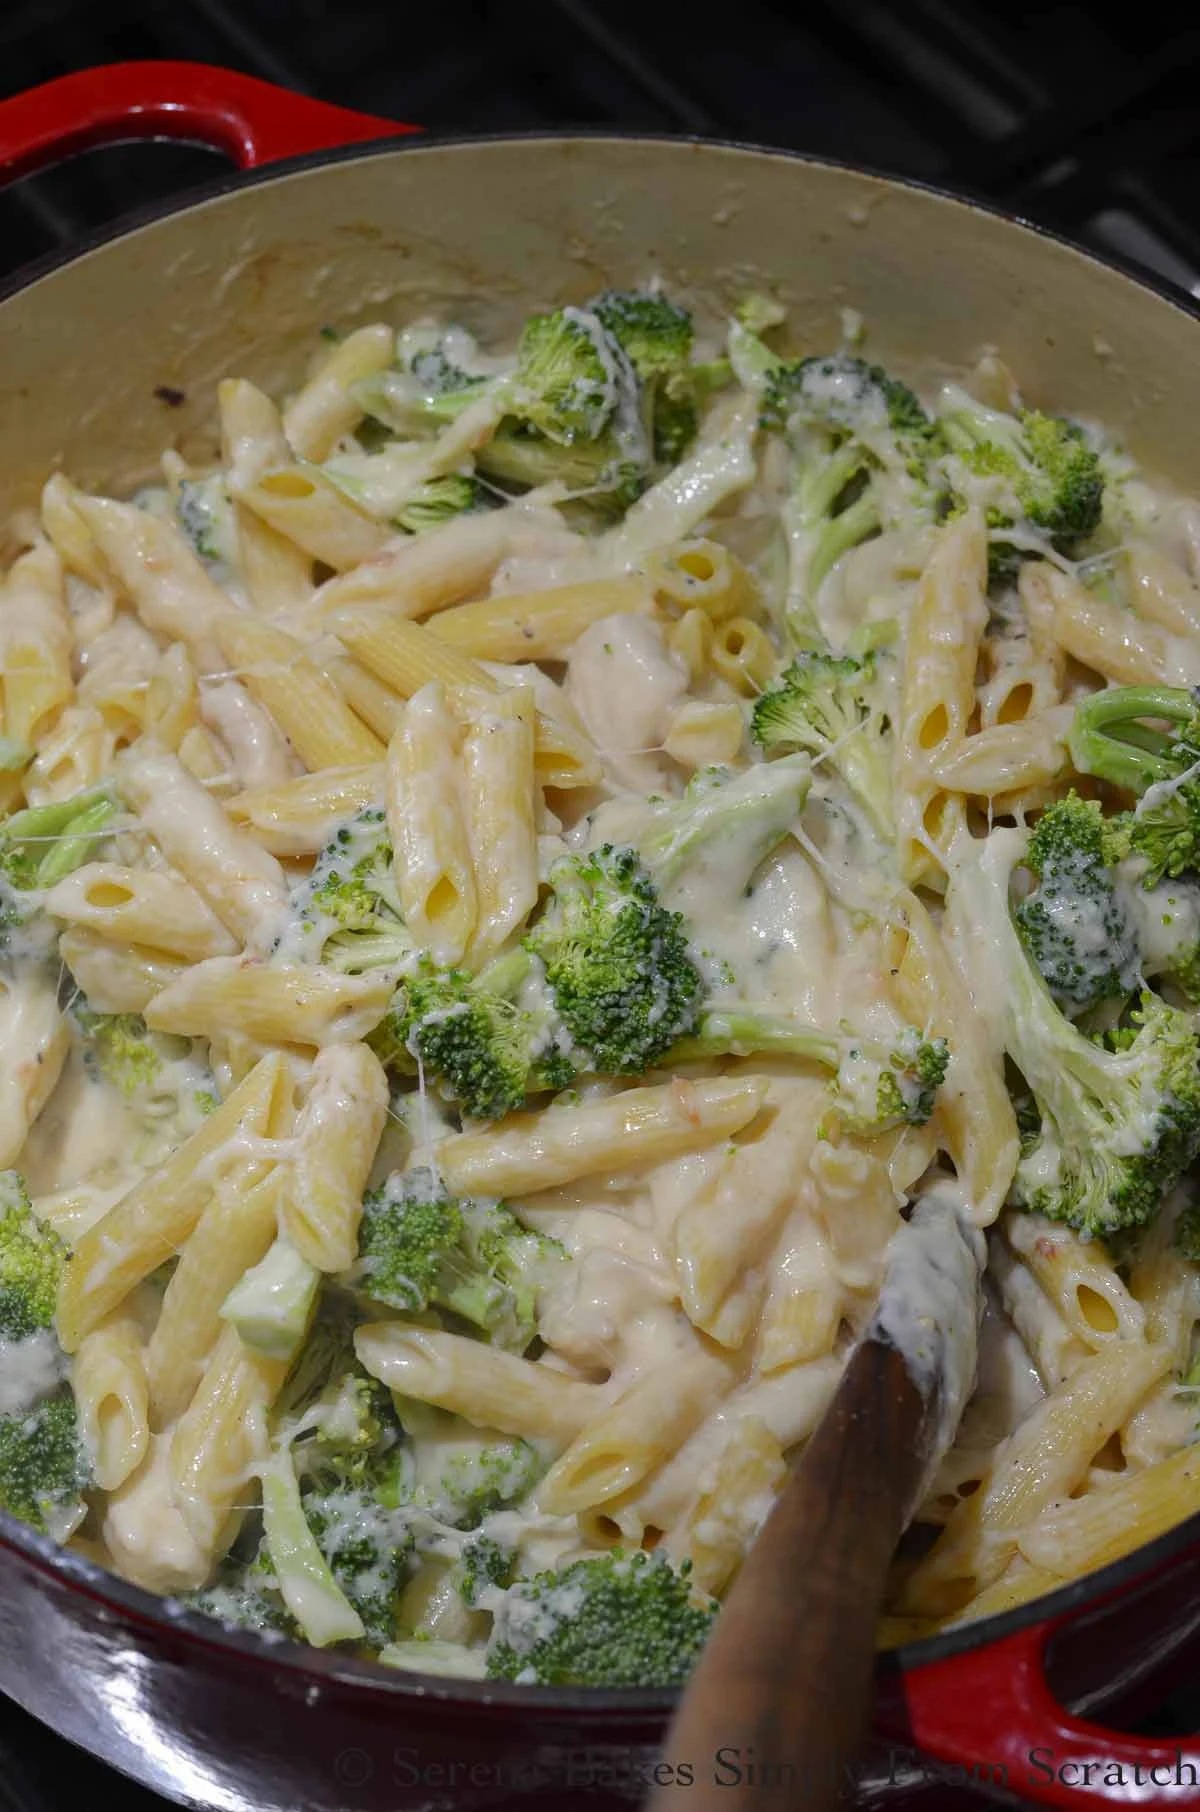 Pasta, Chicken and Broccoli being stirred into cheese sauce.